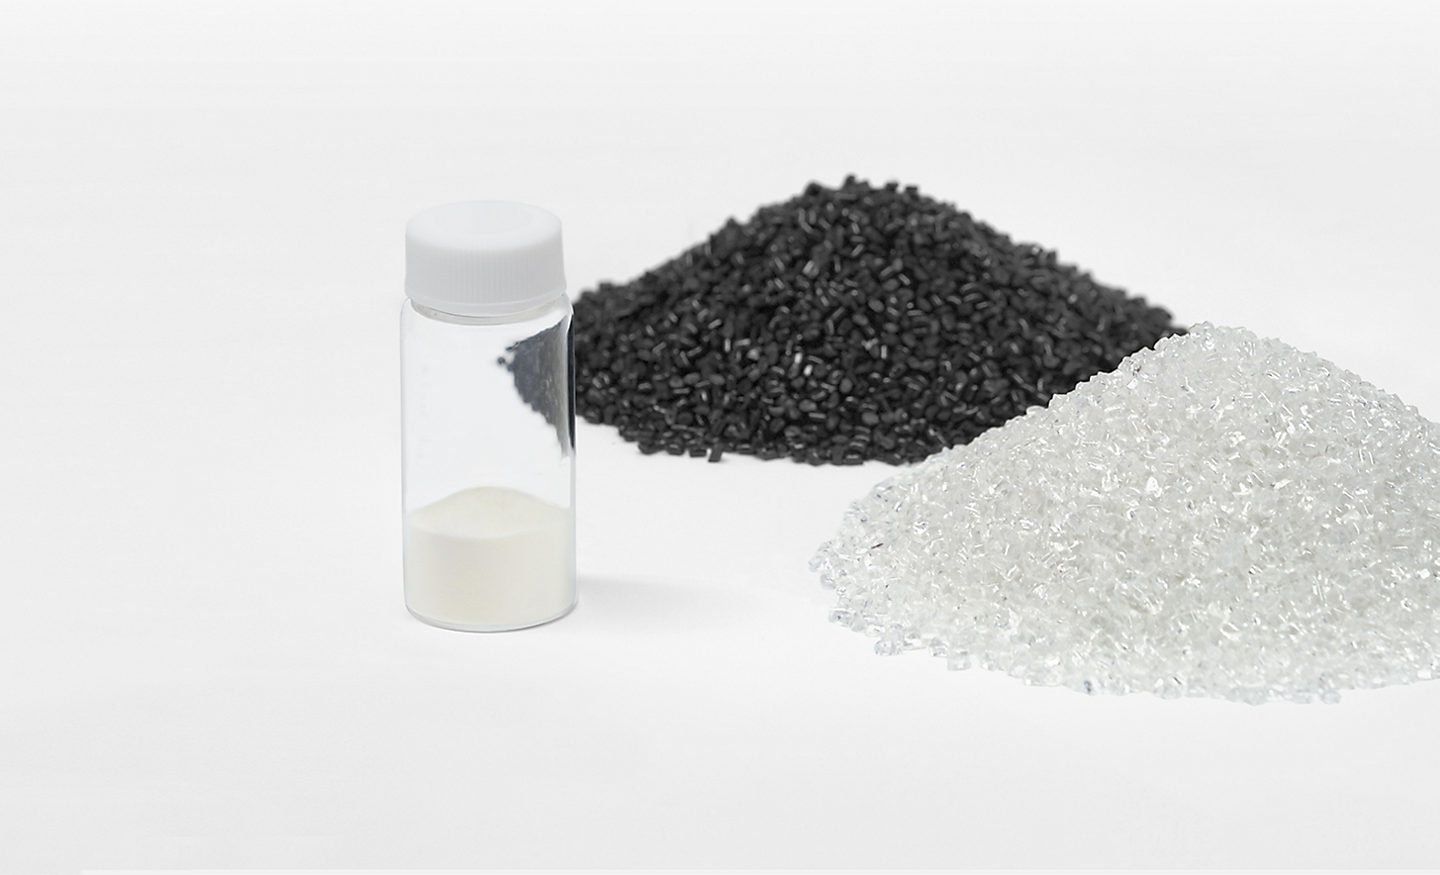 Image of piles of black and silver plastic granules next to a tube of powder